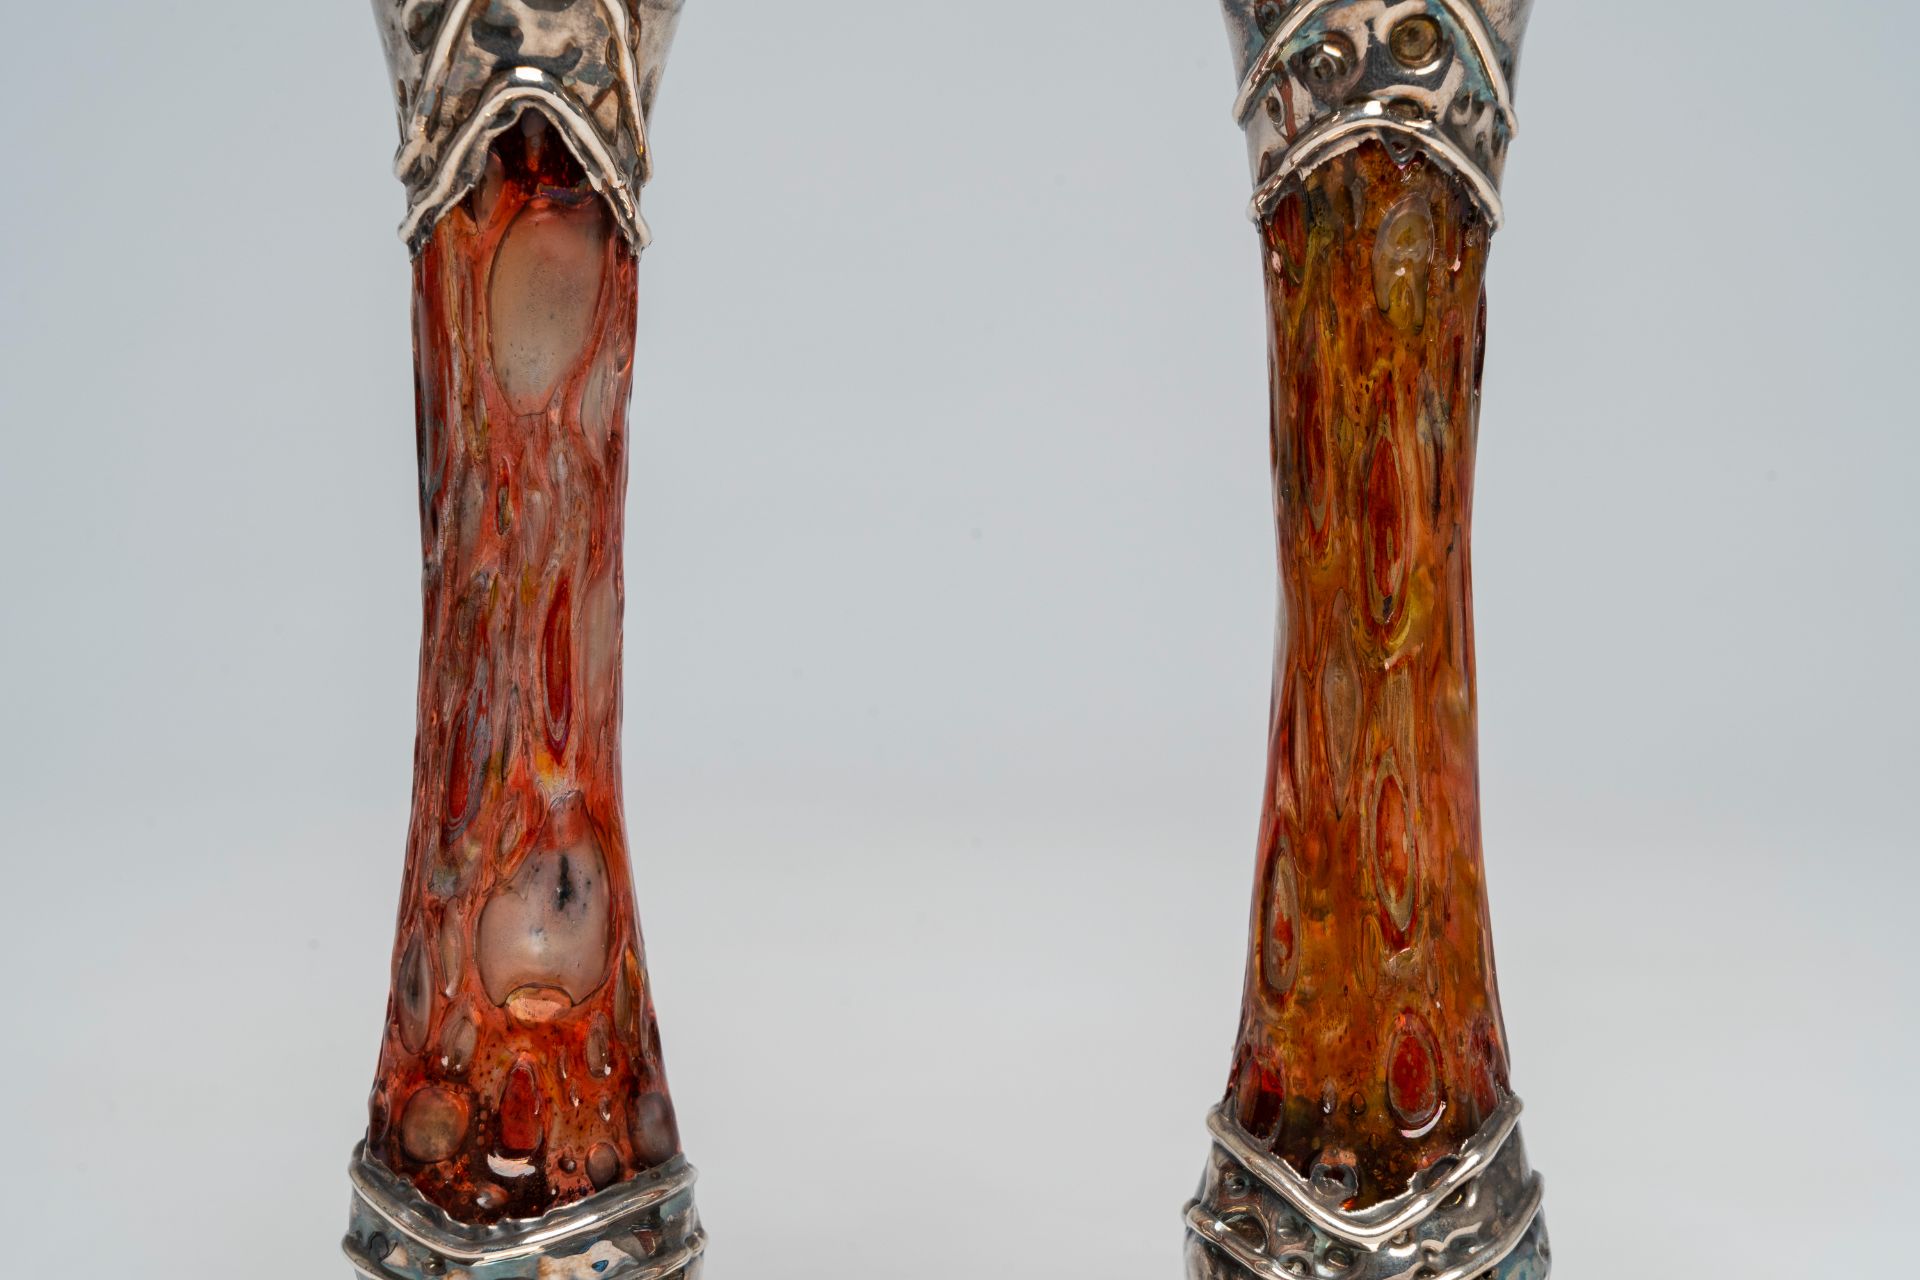 A pair of English or Scottish Arts & Crafts style silver and glass candlesticks, 20th C. - Image 11 of 11